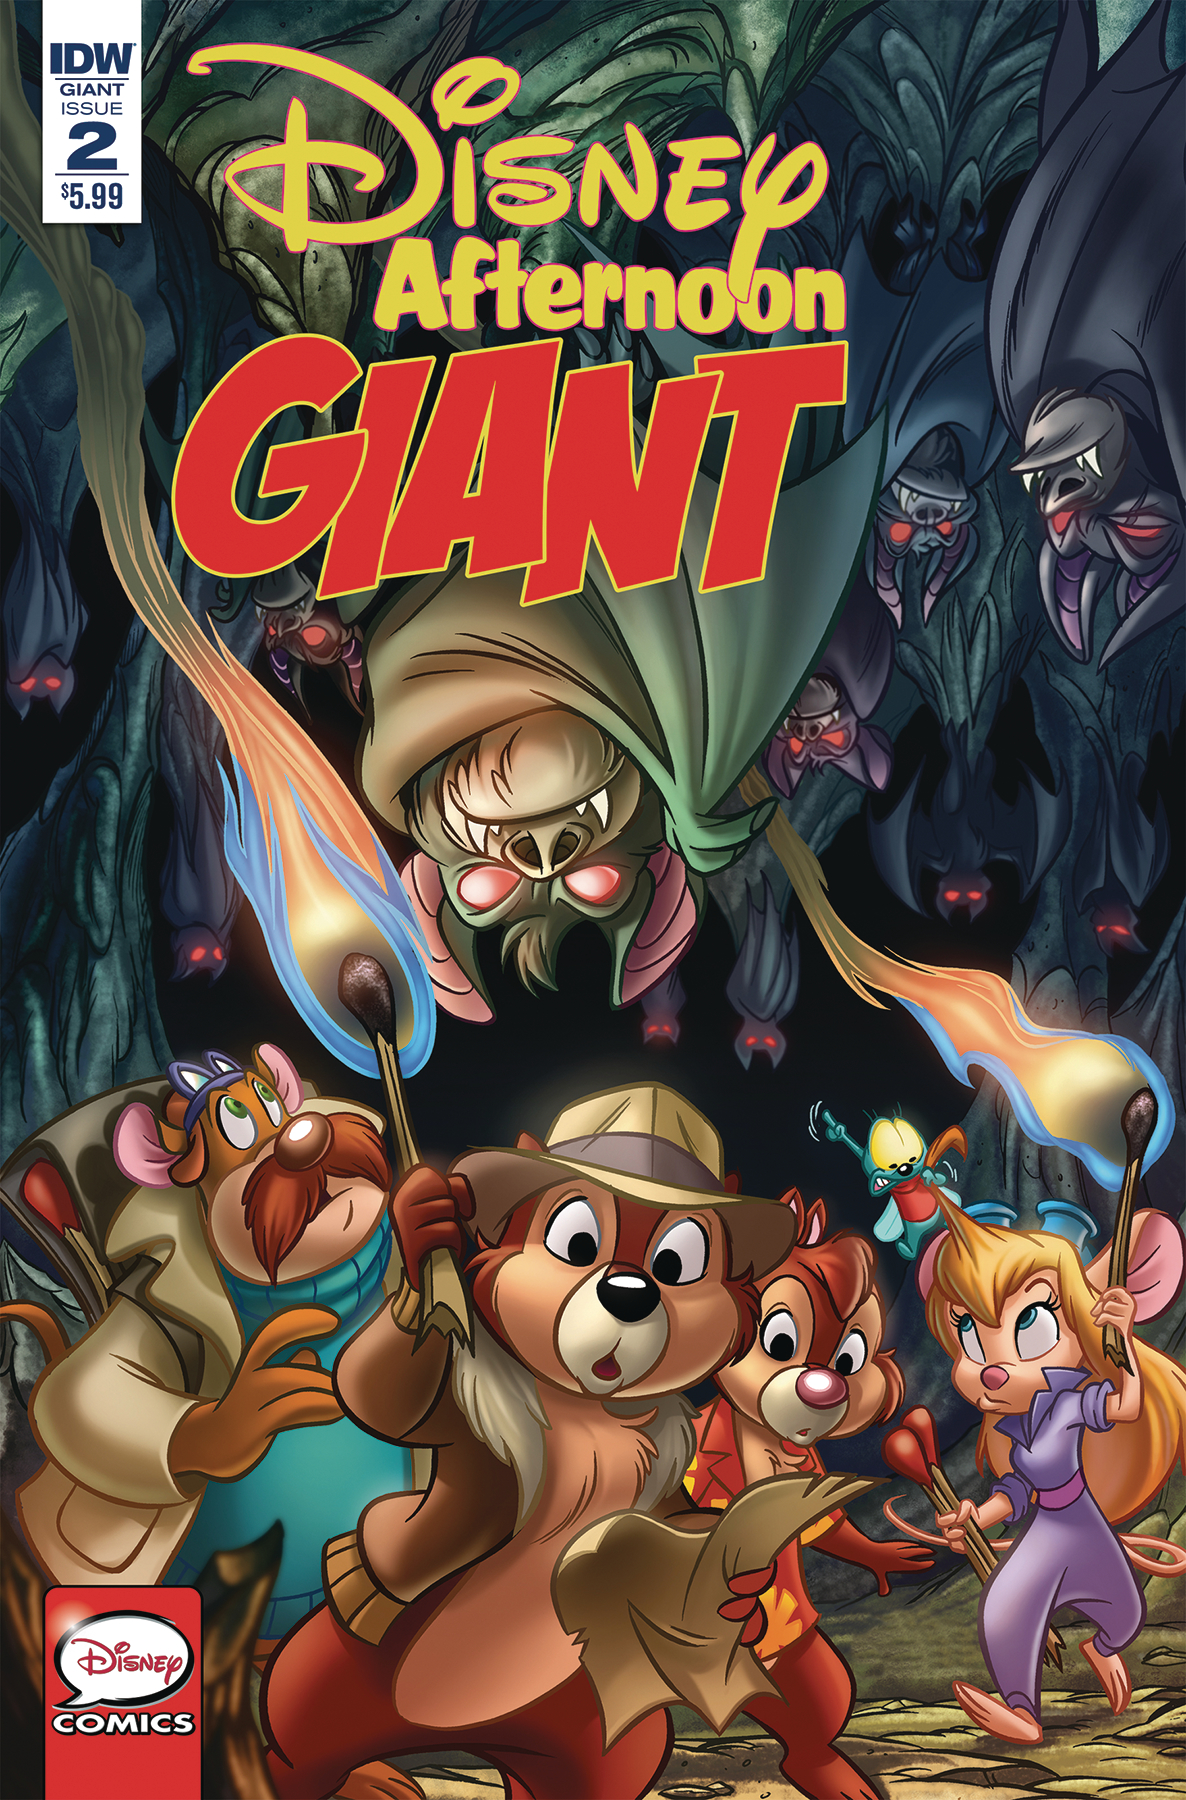 Disney Afternoon Giant no. 2 (2018 Series)